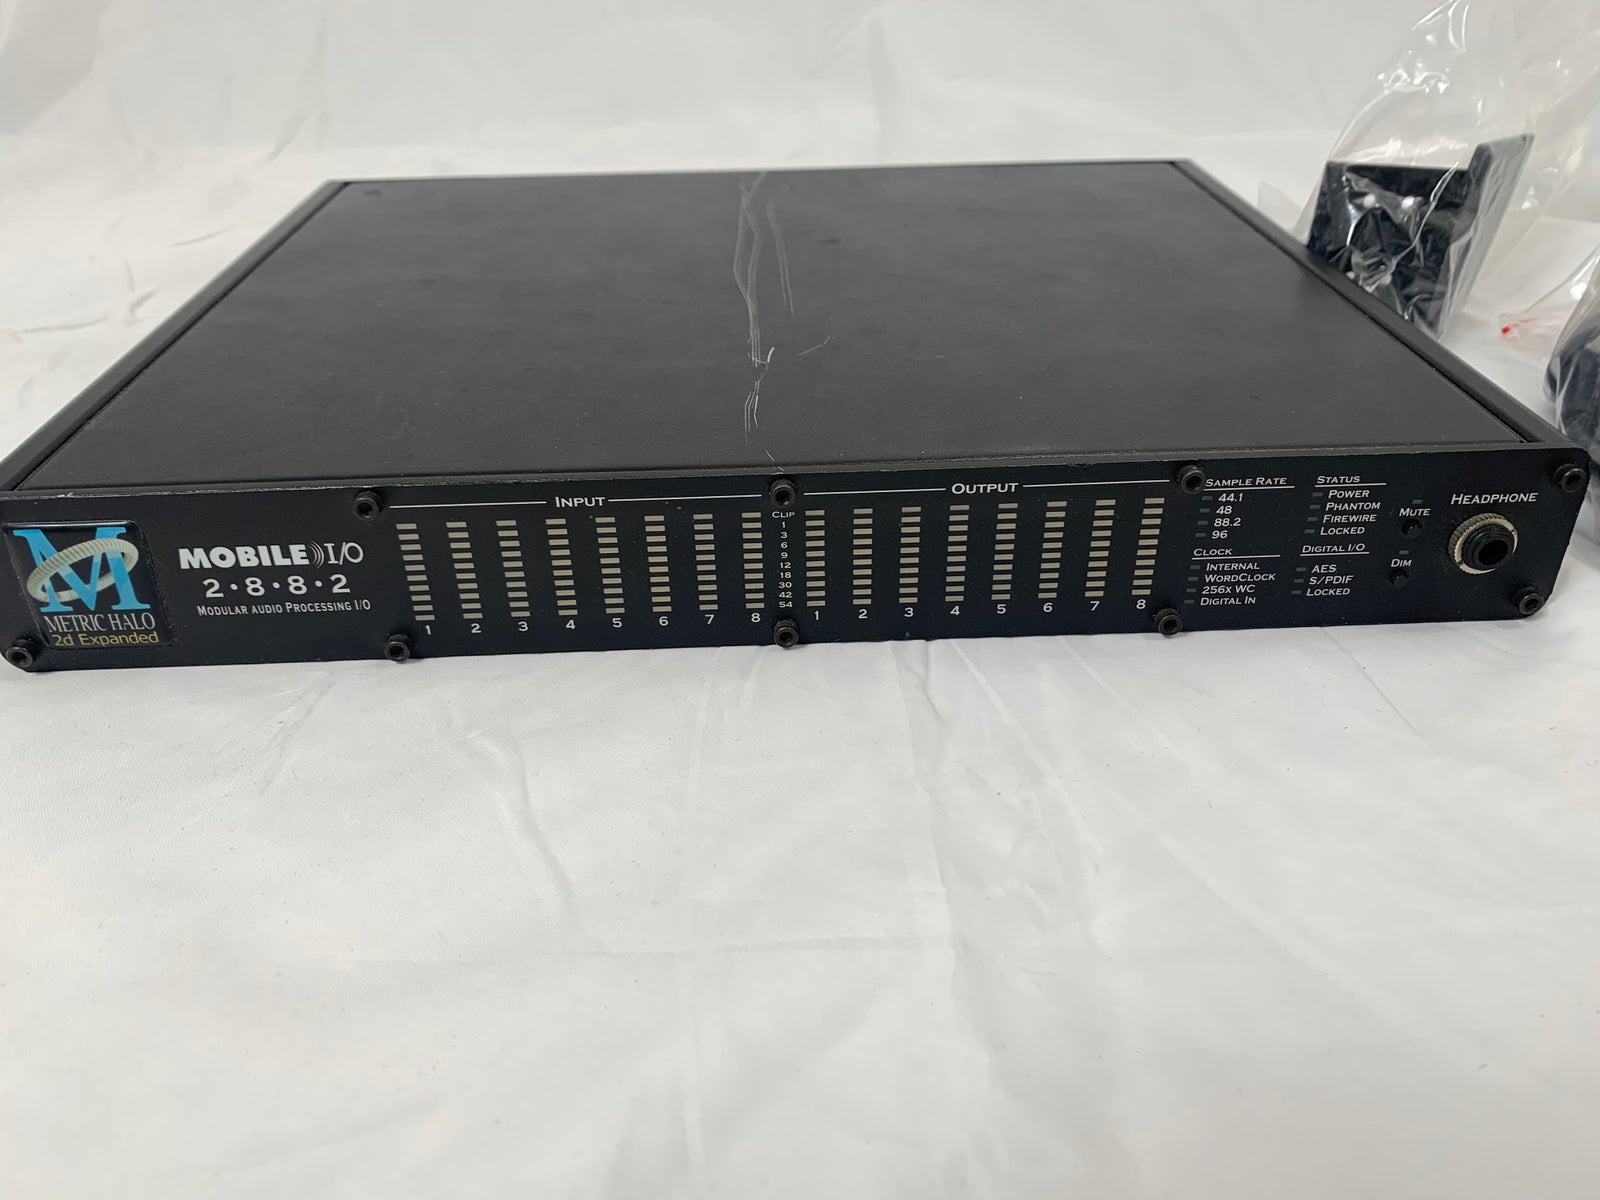 Metric Halo 2882 Mobile I/O 2d Expanded-